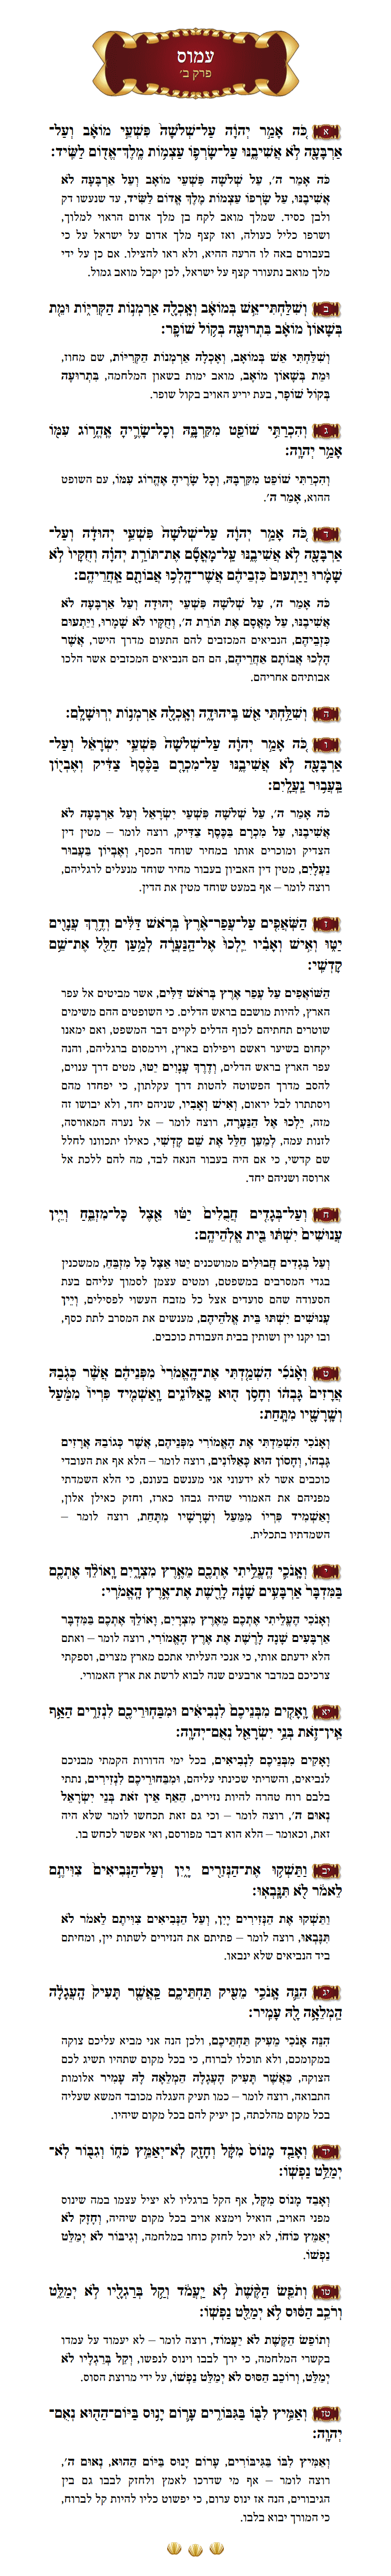 Sefer Amos Chapter 2 with commentary